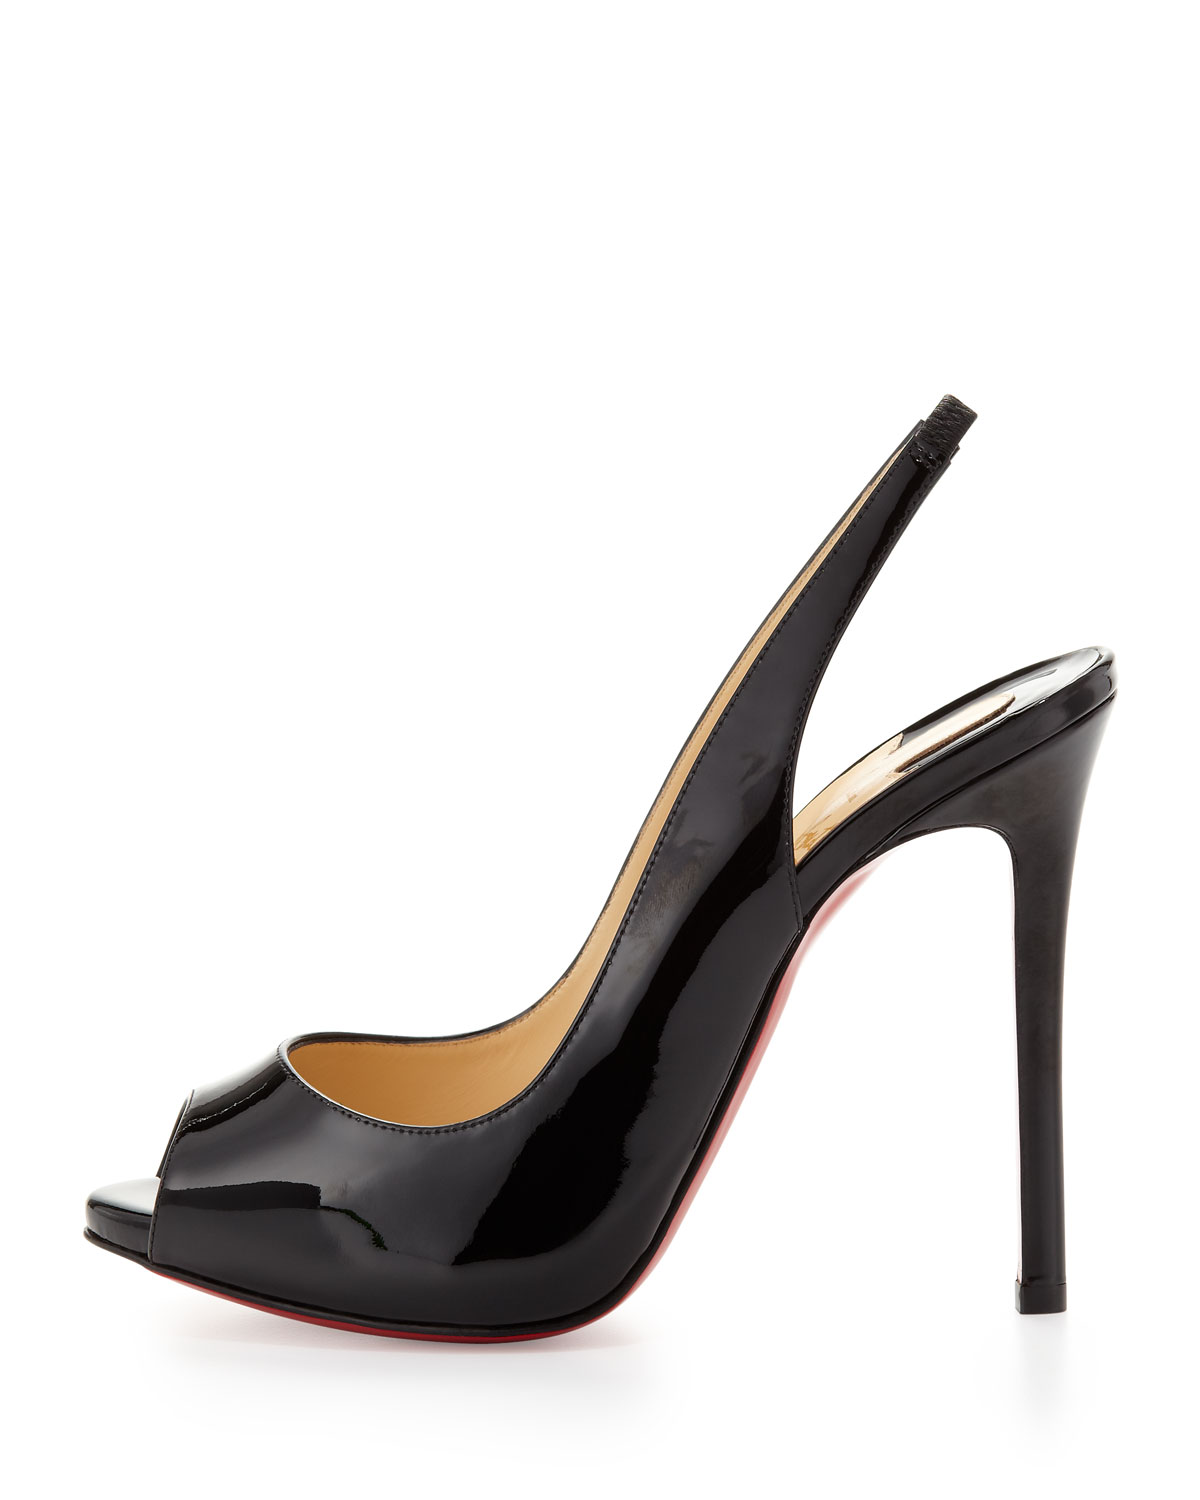 Christian Louboutin Flo Patent Red Sole Slingback Black - Lyst